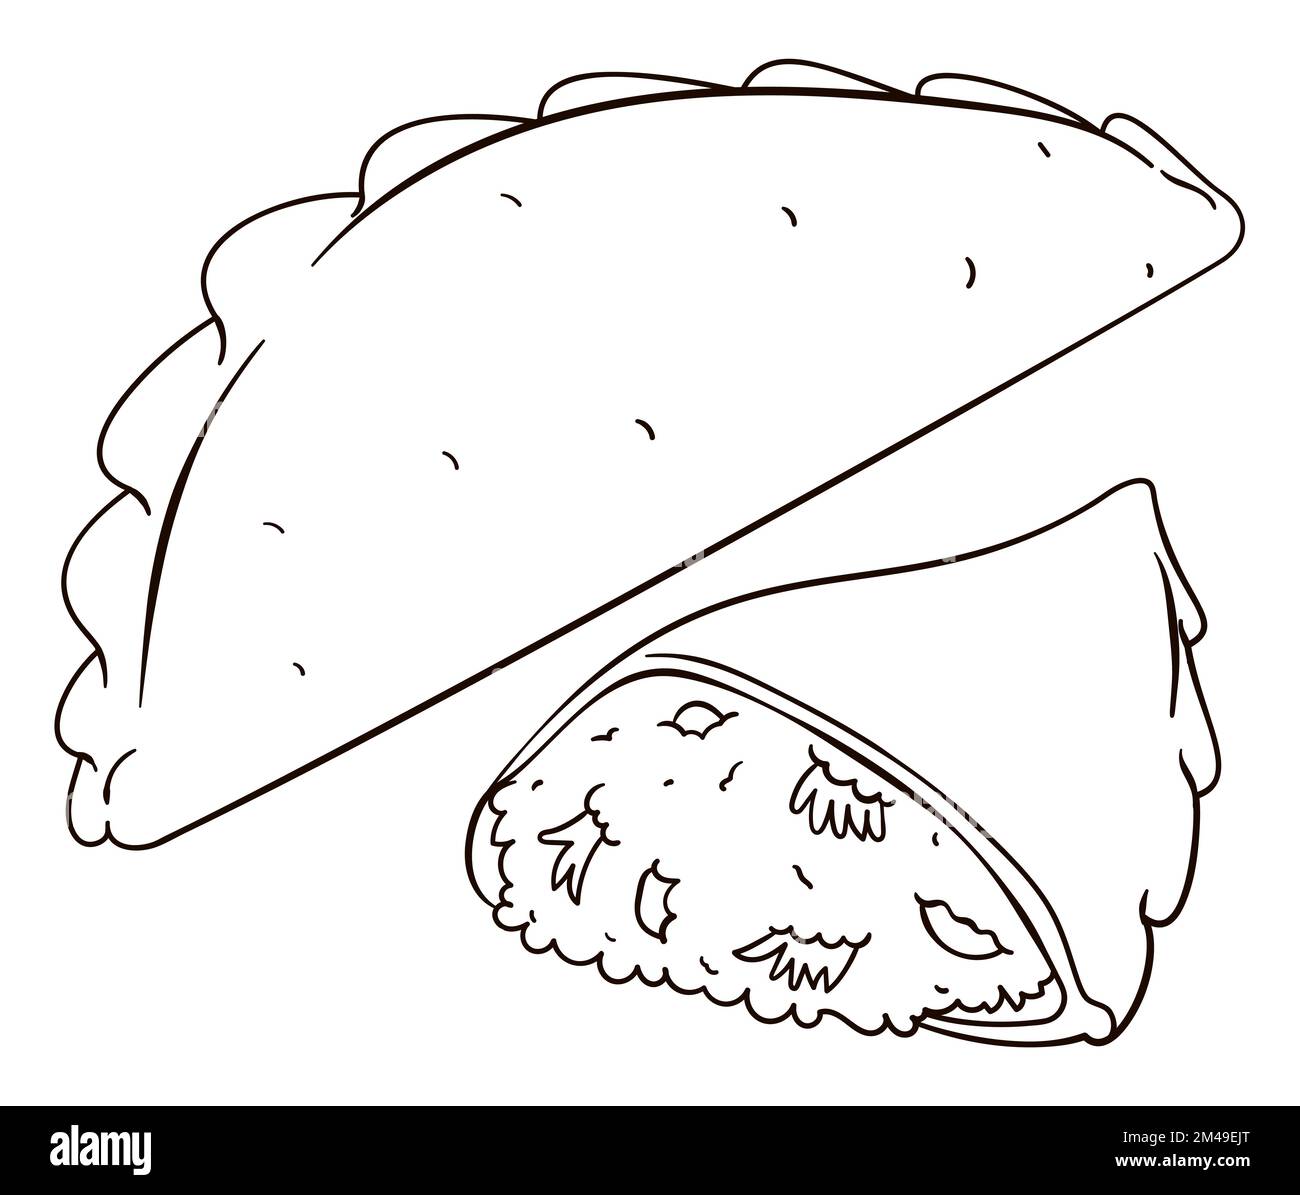 Drawing to coloring of a delicious empanada, one whole and another sliced showing the tasty filling. Stock Vector